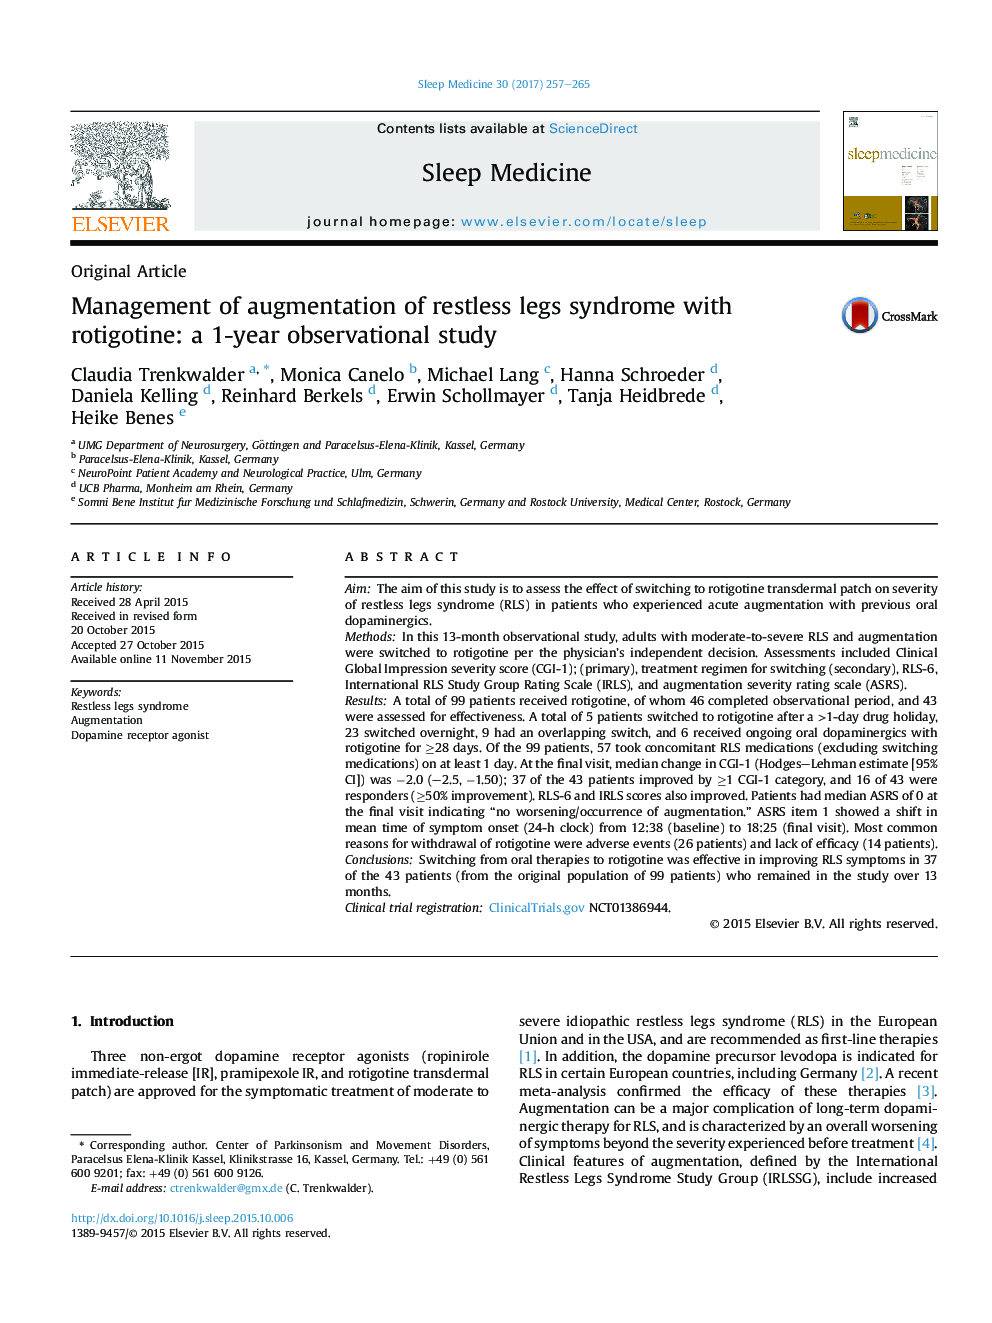 Management of augmentation of restless legs syndrome with rotigotine: a 1-year observational study